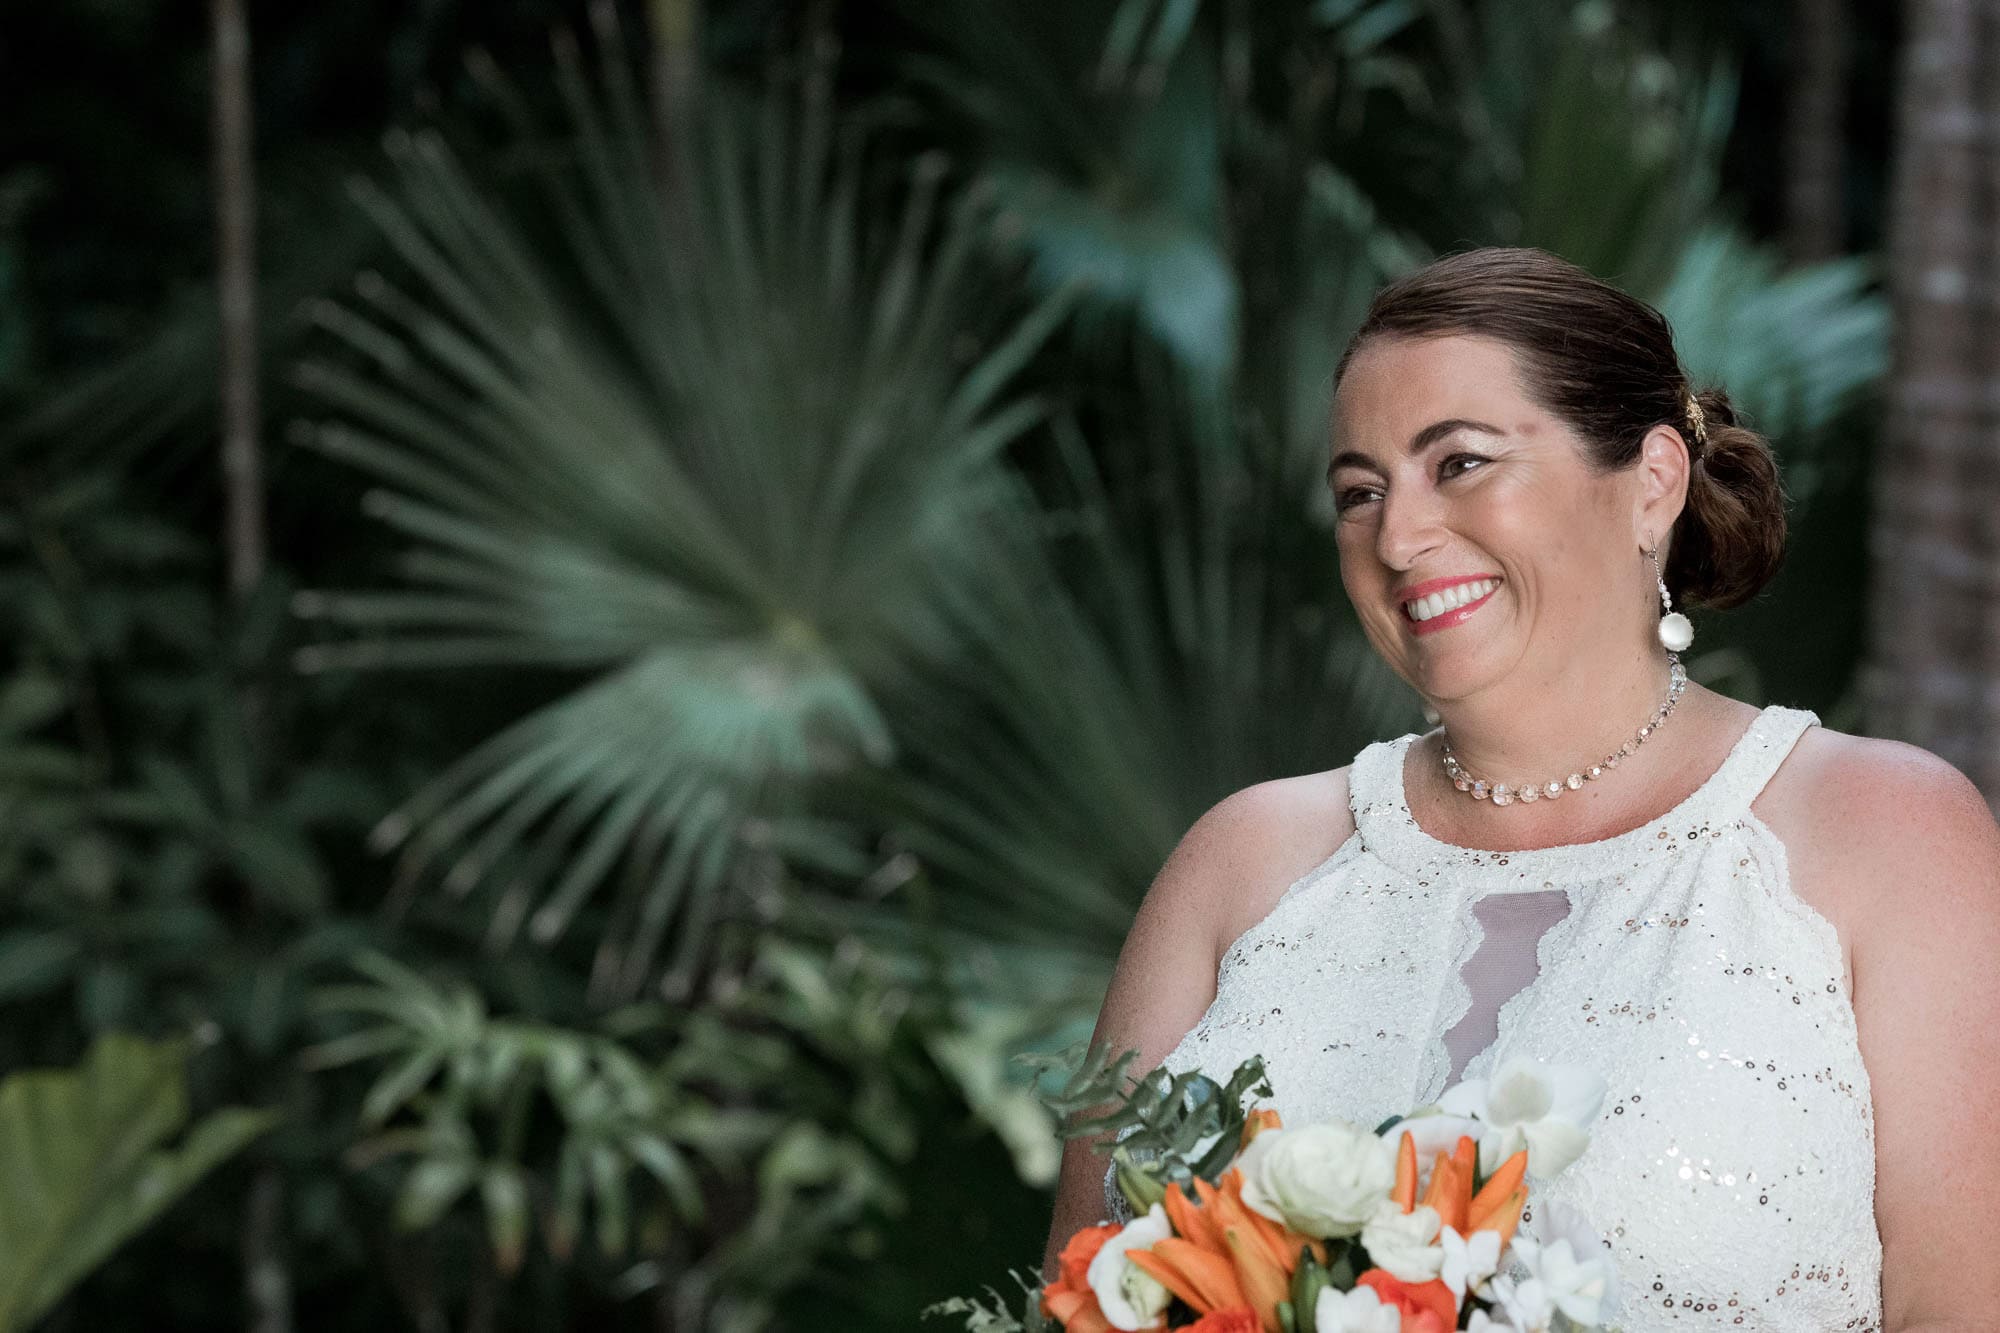 Pure happiness radiates from the bride's face